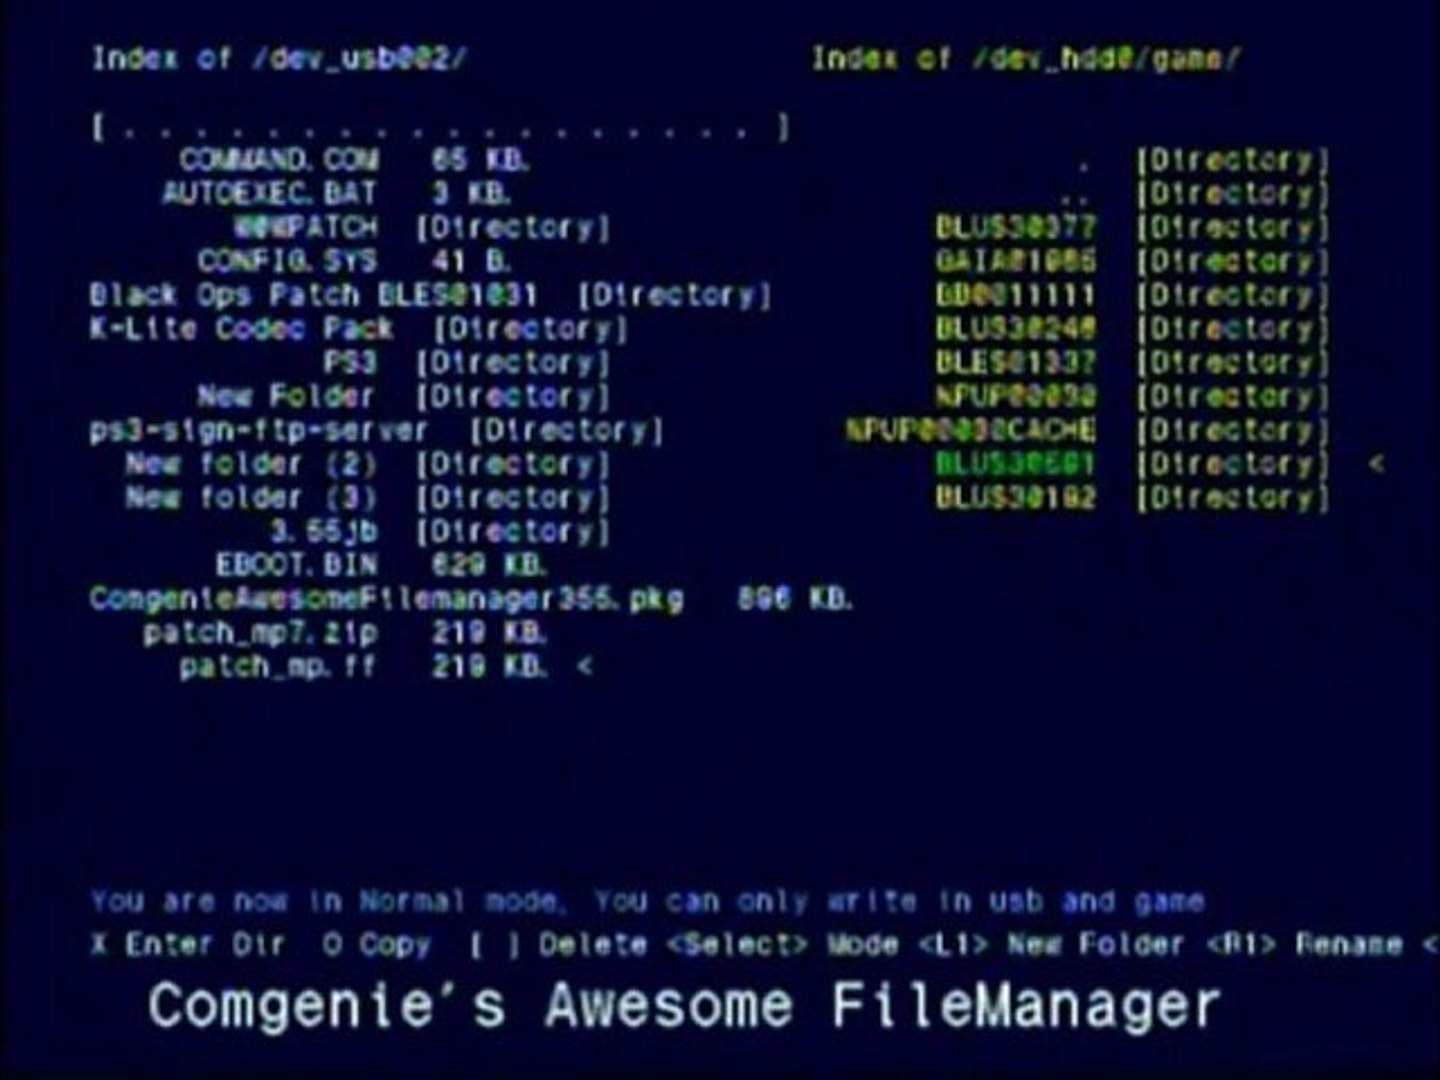 comgenies awesome file manager 4.31